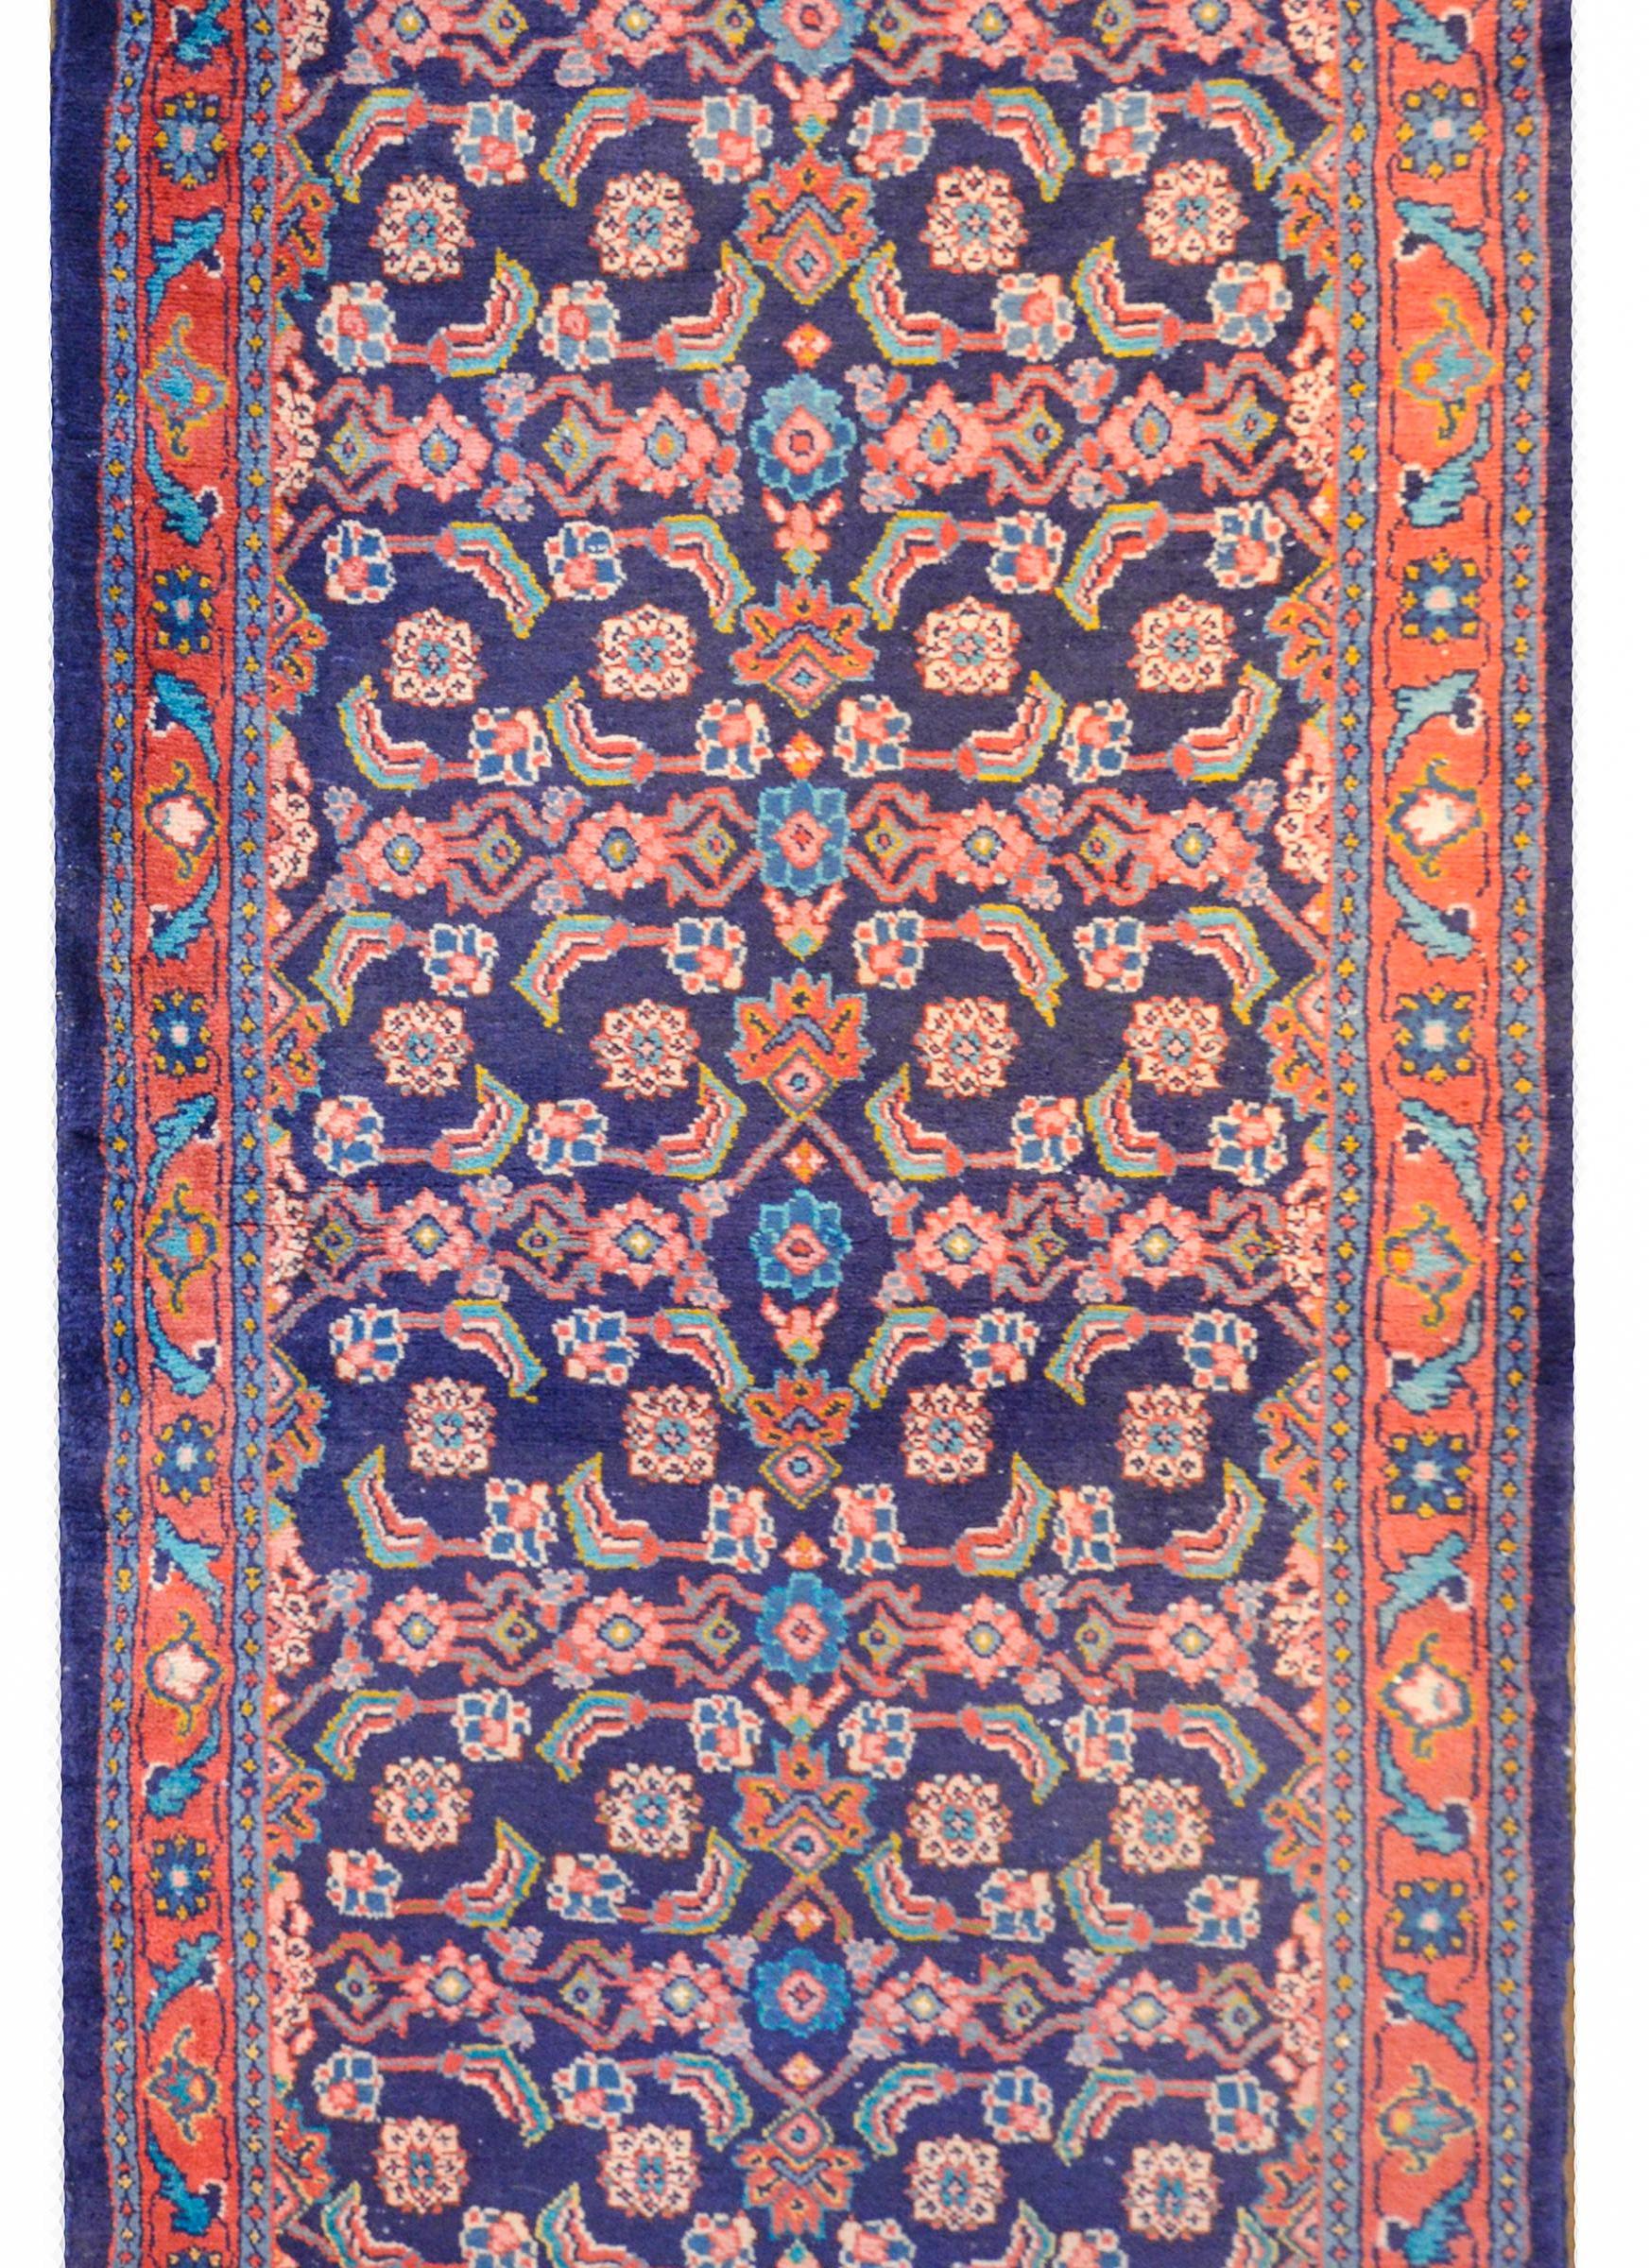 A wonderful vintage Persian Veese runner containing a traditional Herati pattern with an all-over trellis pattern of flowers and leaves woven in myriad colors on a dark indigo background surrounded by a large-scale floral and leaf patterned border.